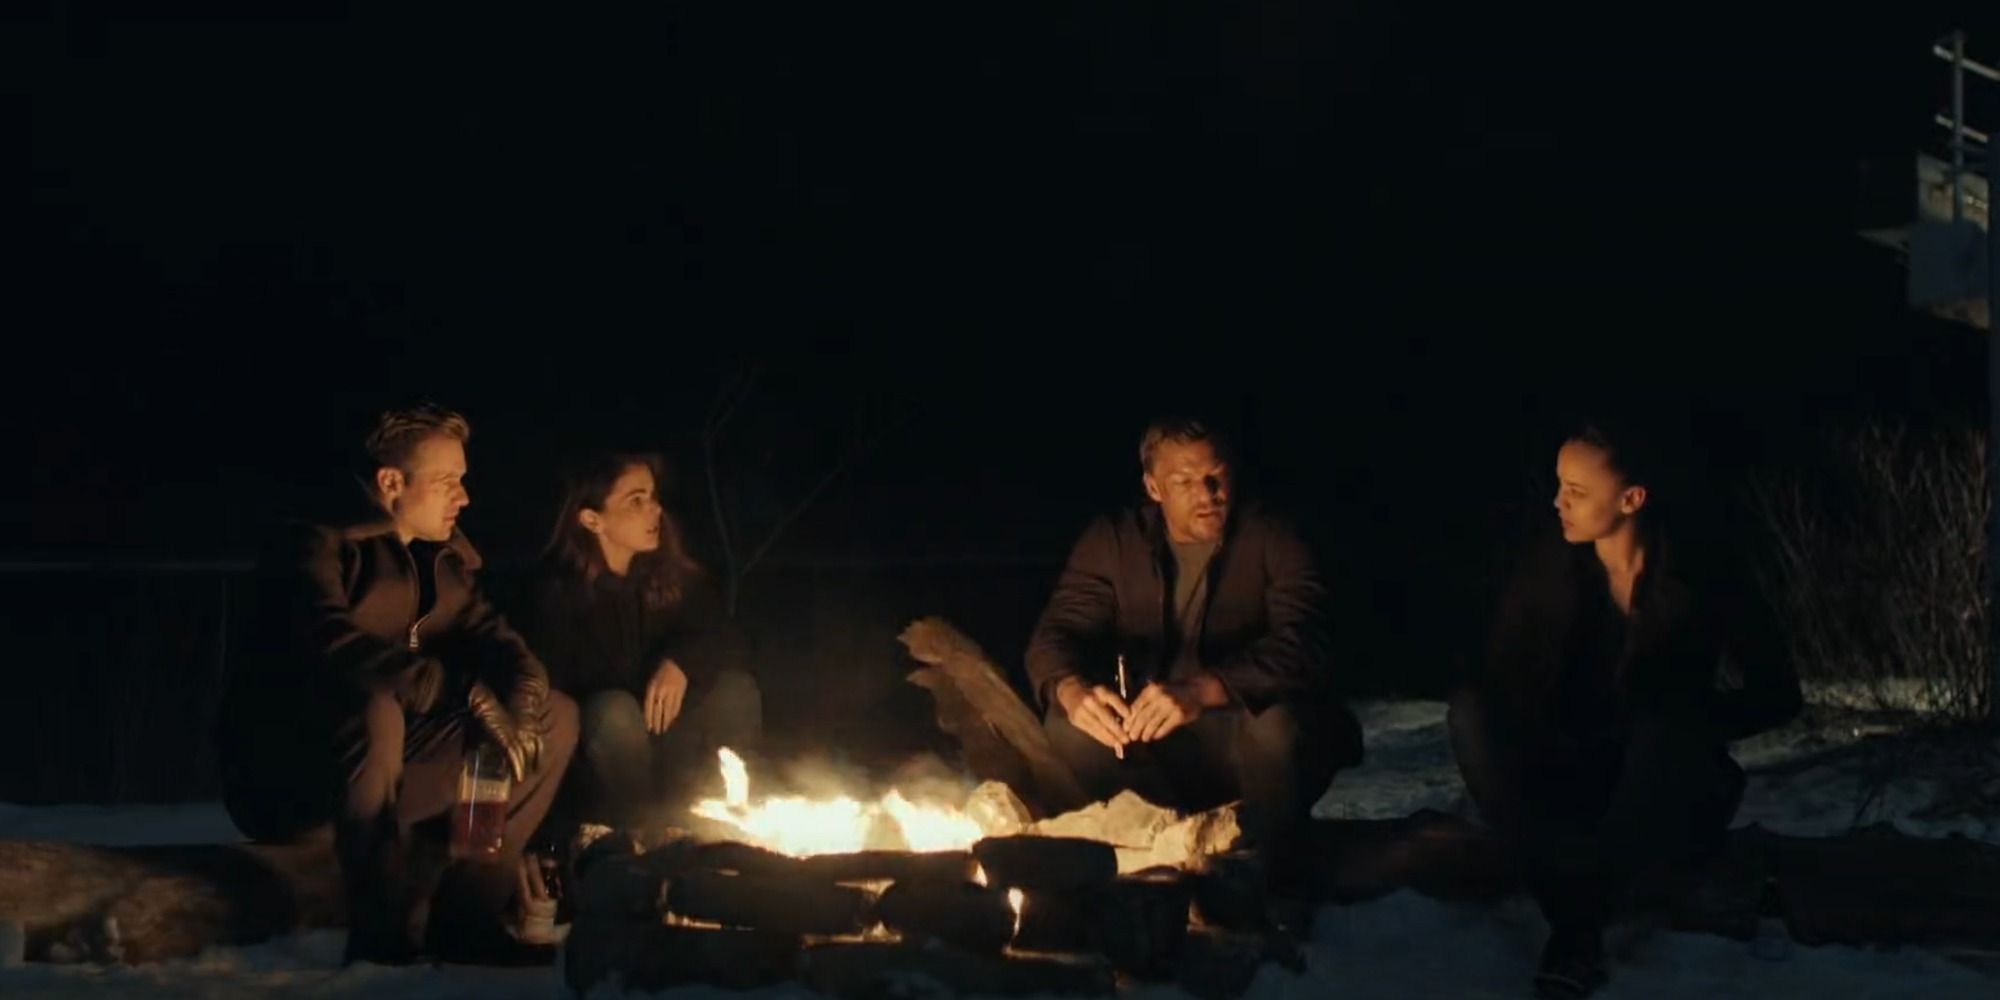 O'Donnell, Dixon, Reacher, and Neagley sit around a camp fire in the final episode of Reacher season 2